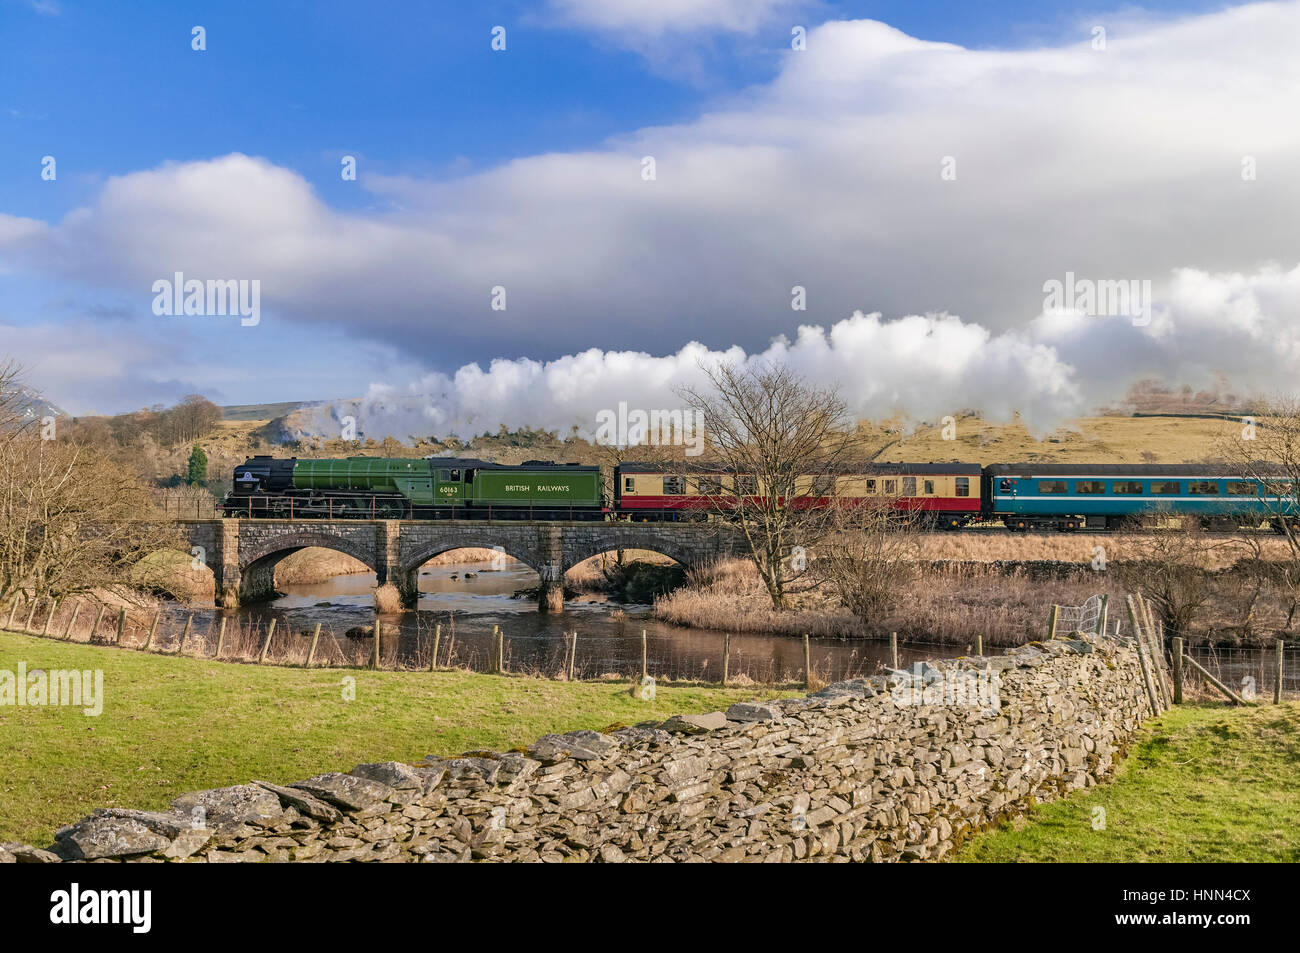 Helwith Bridge. North Yorkshire. North West England. Wednesday 15th February 2017. The Peppercorn steam engine Tornado on the secnond day of hauling scheduled trains between Skipton and Appleby on the Settle to Carlisle railway. The services are the first schedueld steam hauled services on British rail for 50 years. The train is pictured passing over Helwith Bridge 4 miles north of Settle. Credit: John Davidson/Alamy Live News. Stock Photo